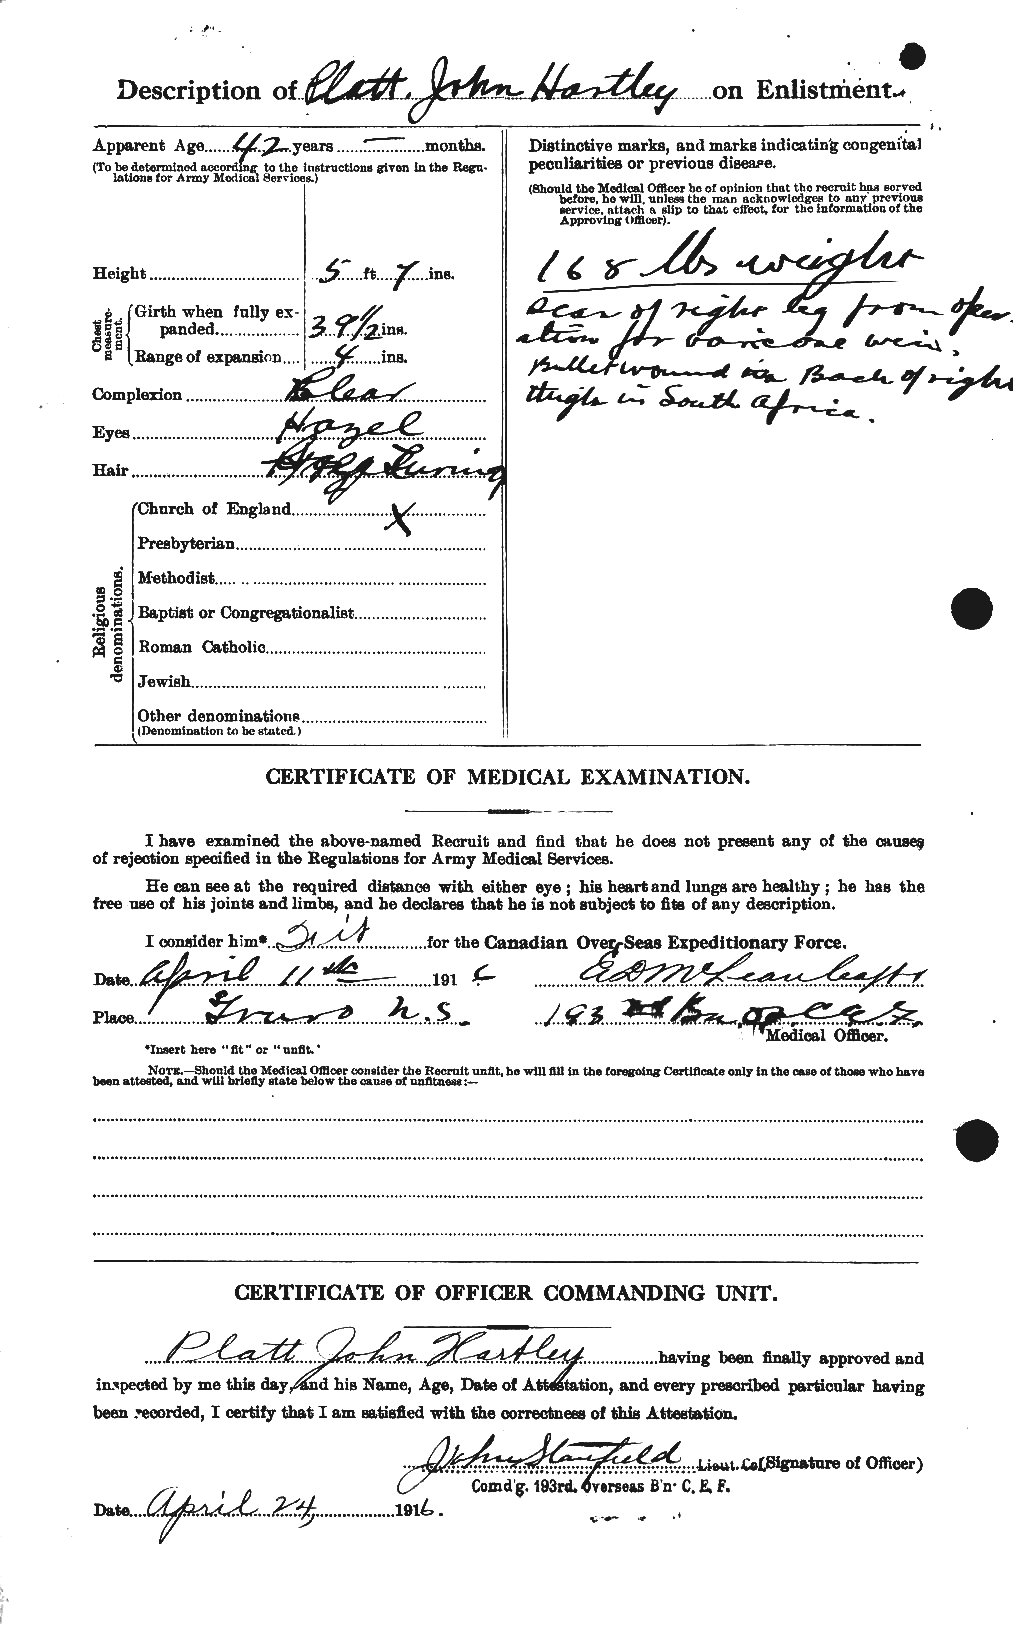 Personnel Records of the First World War - CEF 580204b